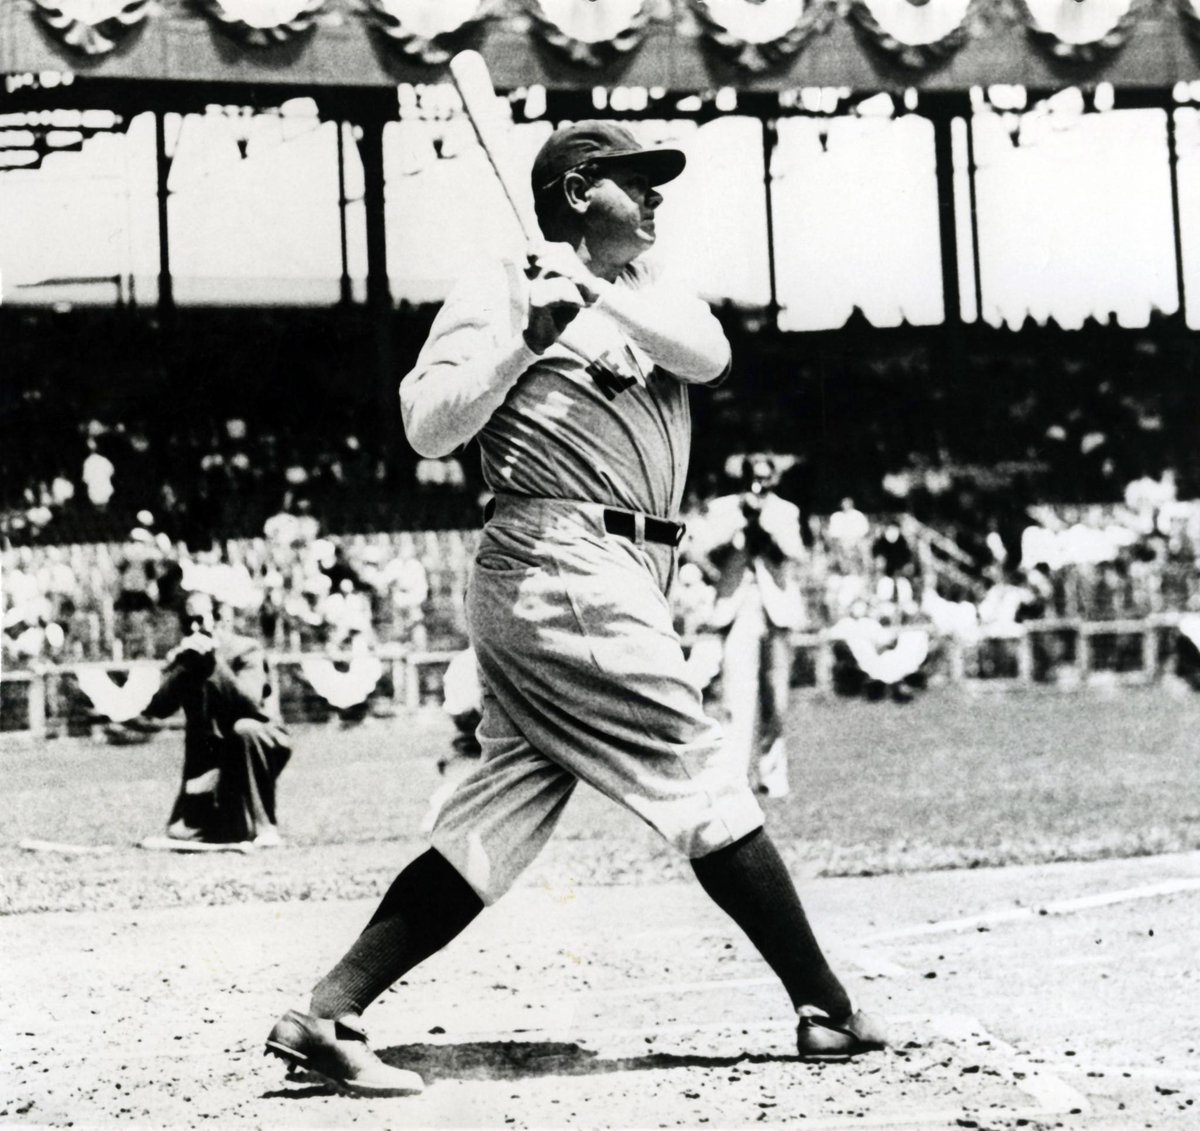 On this day 89 years ago, Babe Ruth became first player to hit 3 HR in a Wo...